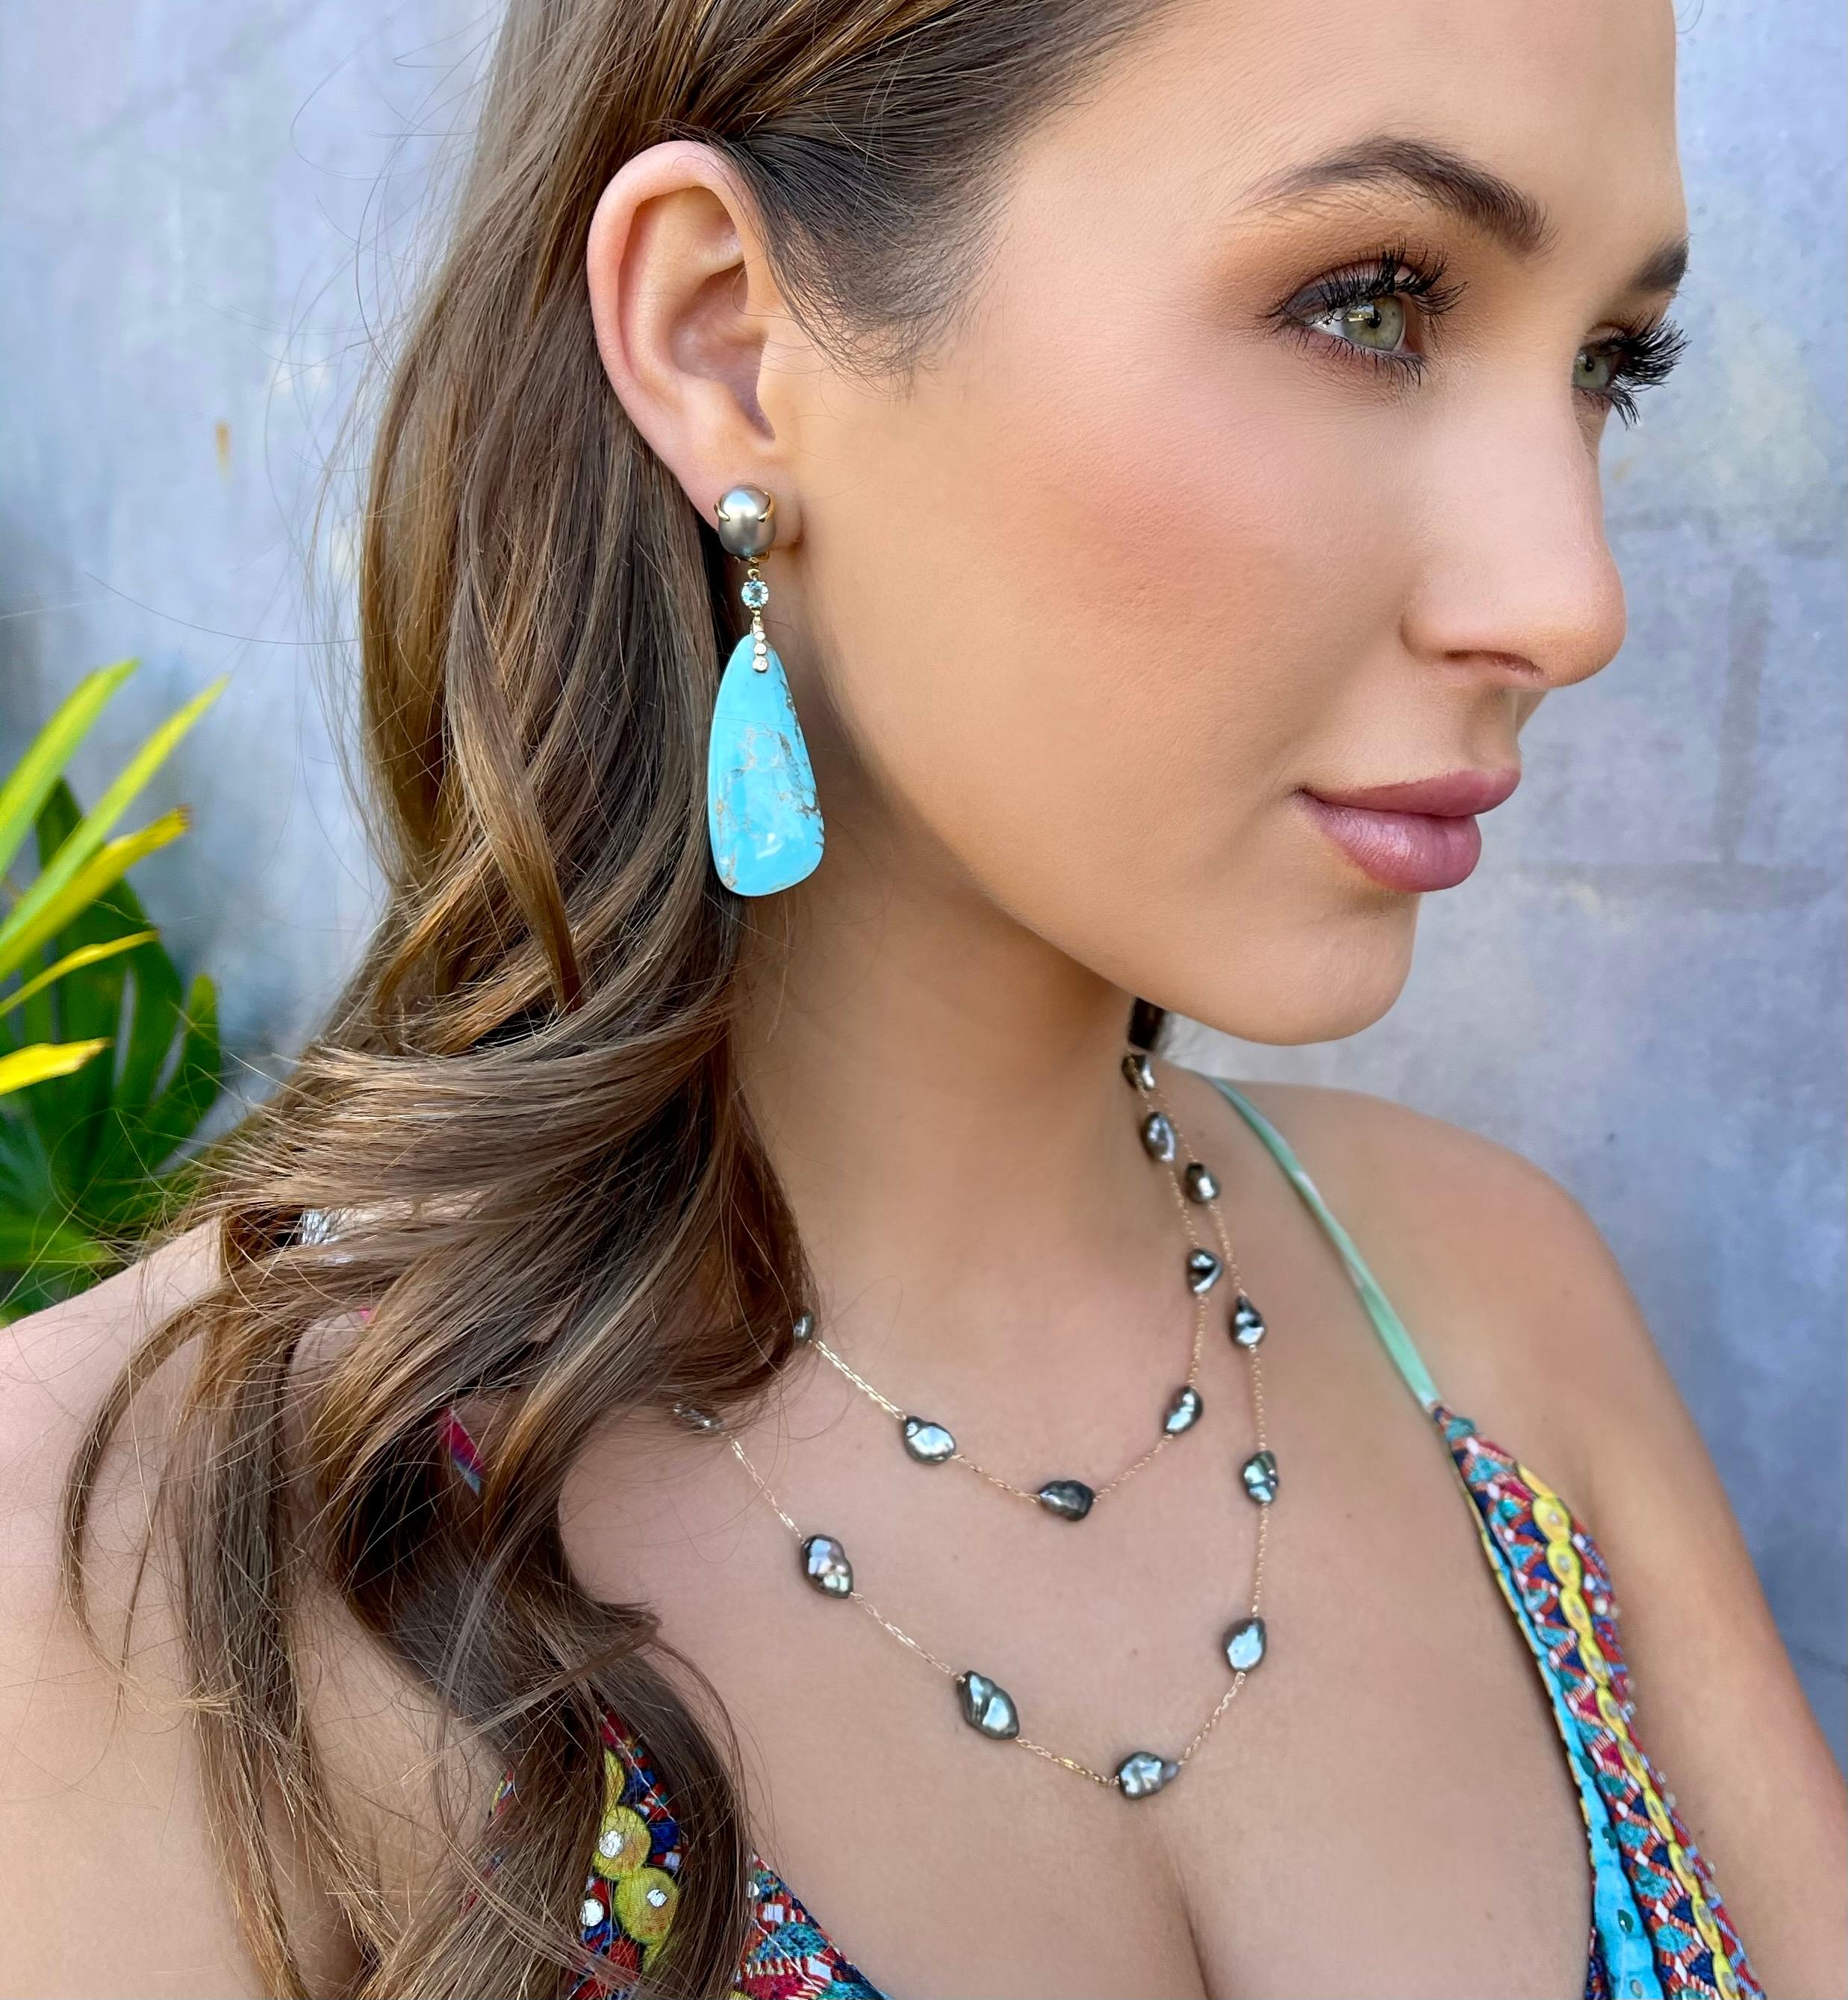 Turquoise, keshi pearl, blue topaz and diamond dangle earrings, handcrafted in 18 karat yellow gold.

These are one-of-a-kind long and elegant turquoise drop earrings that dangle from lustrous grey keshi pearls and a blue topaz center stone. The